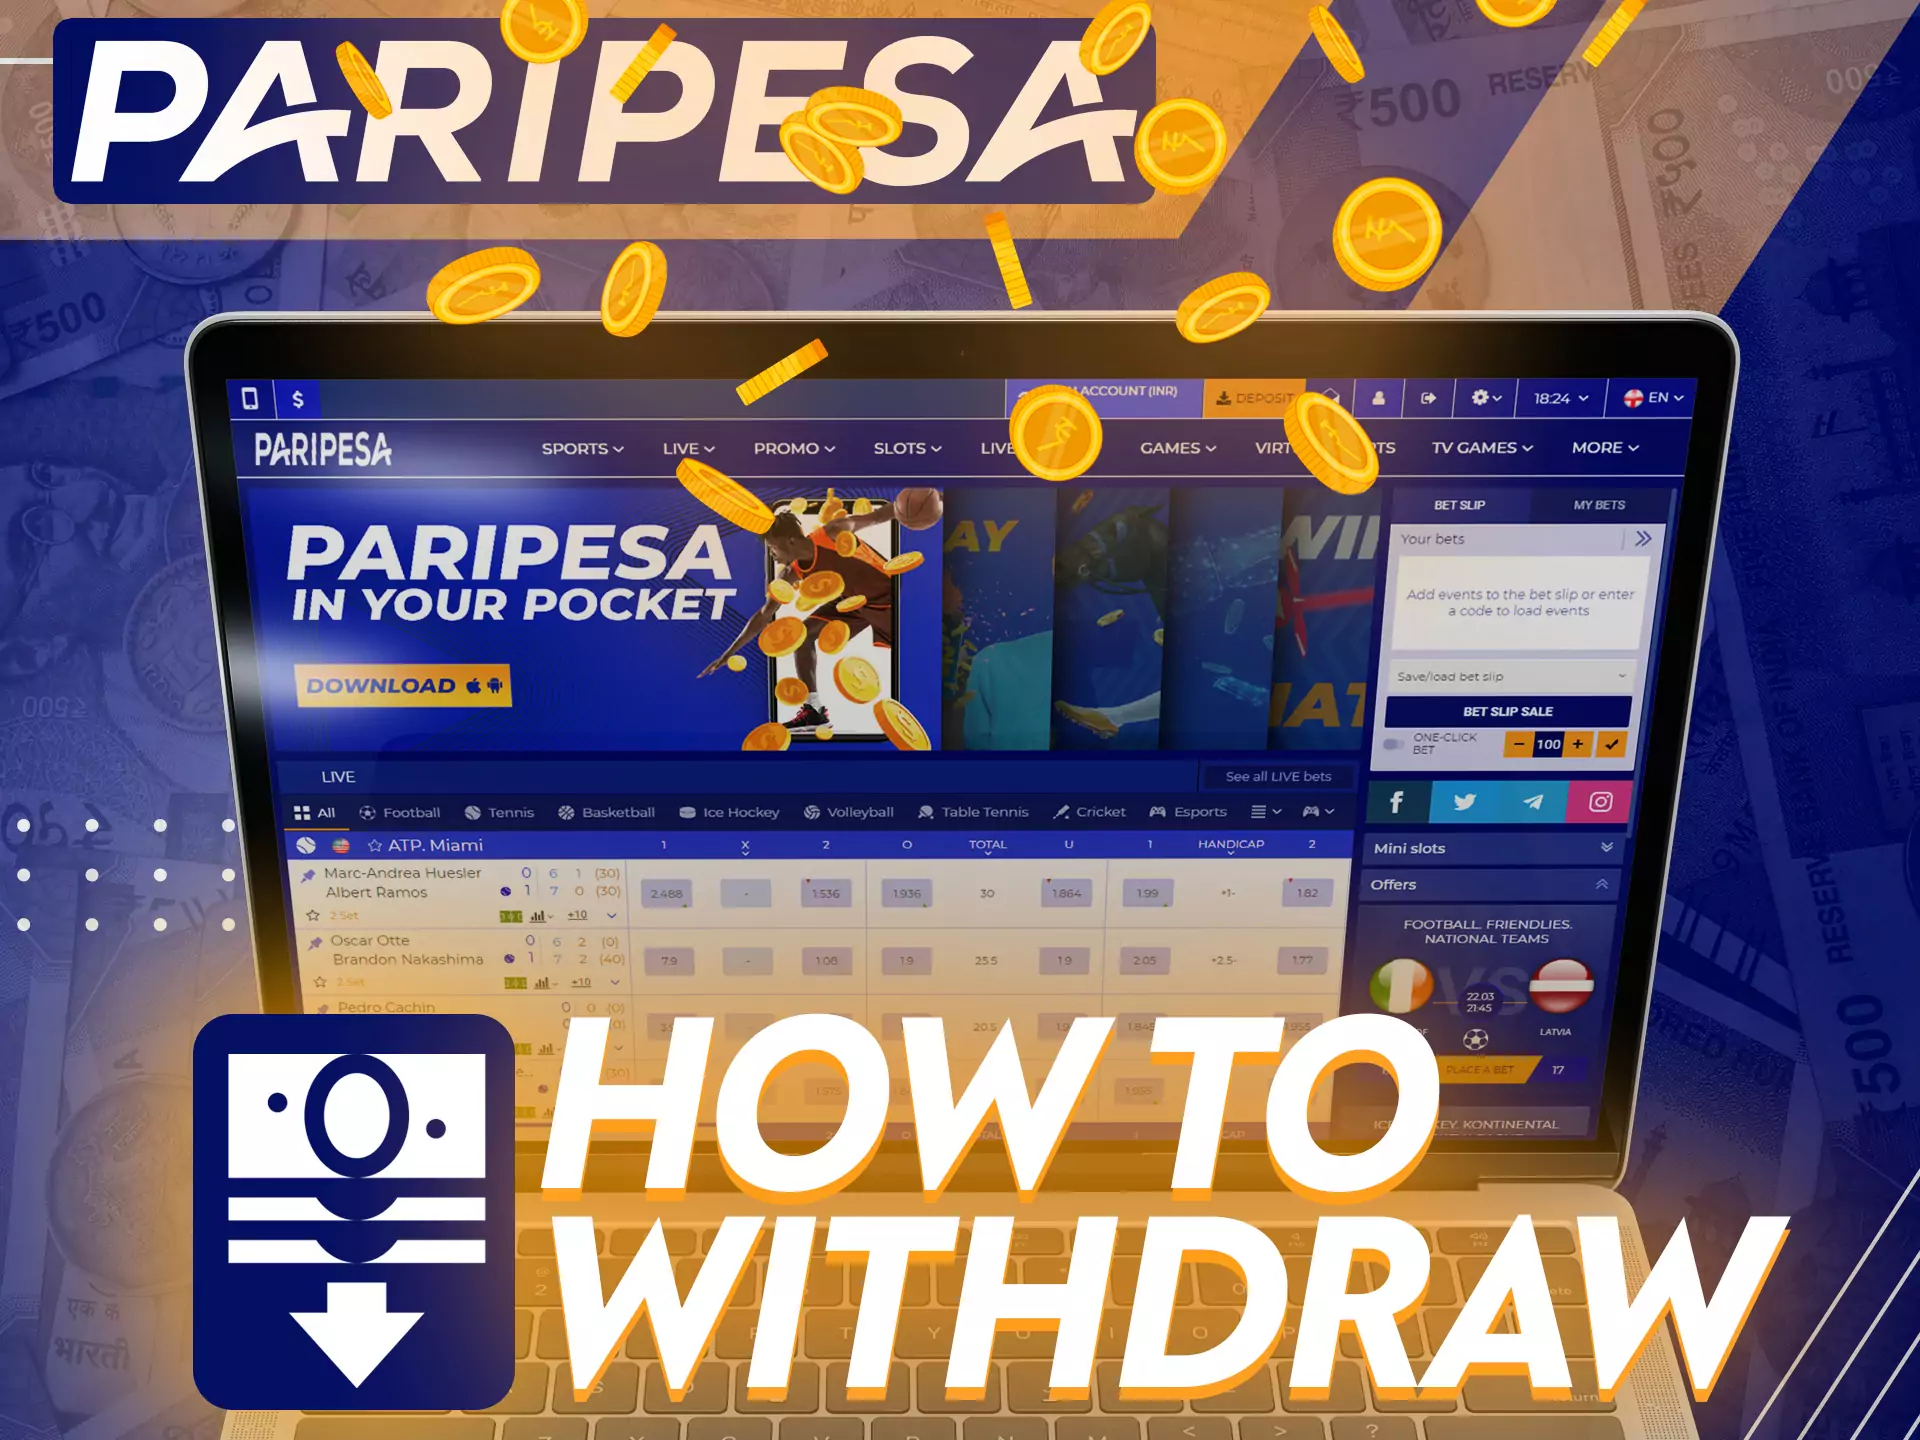 At Paripesa you can easily withdraw your winnings.